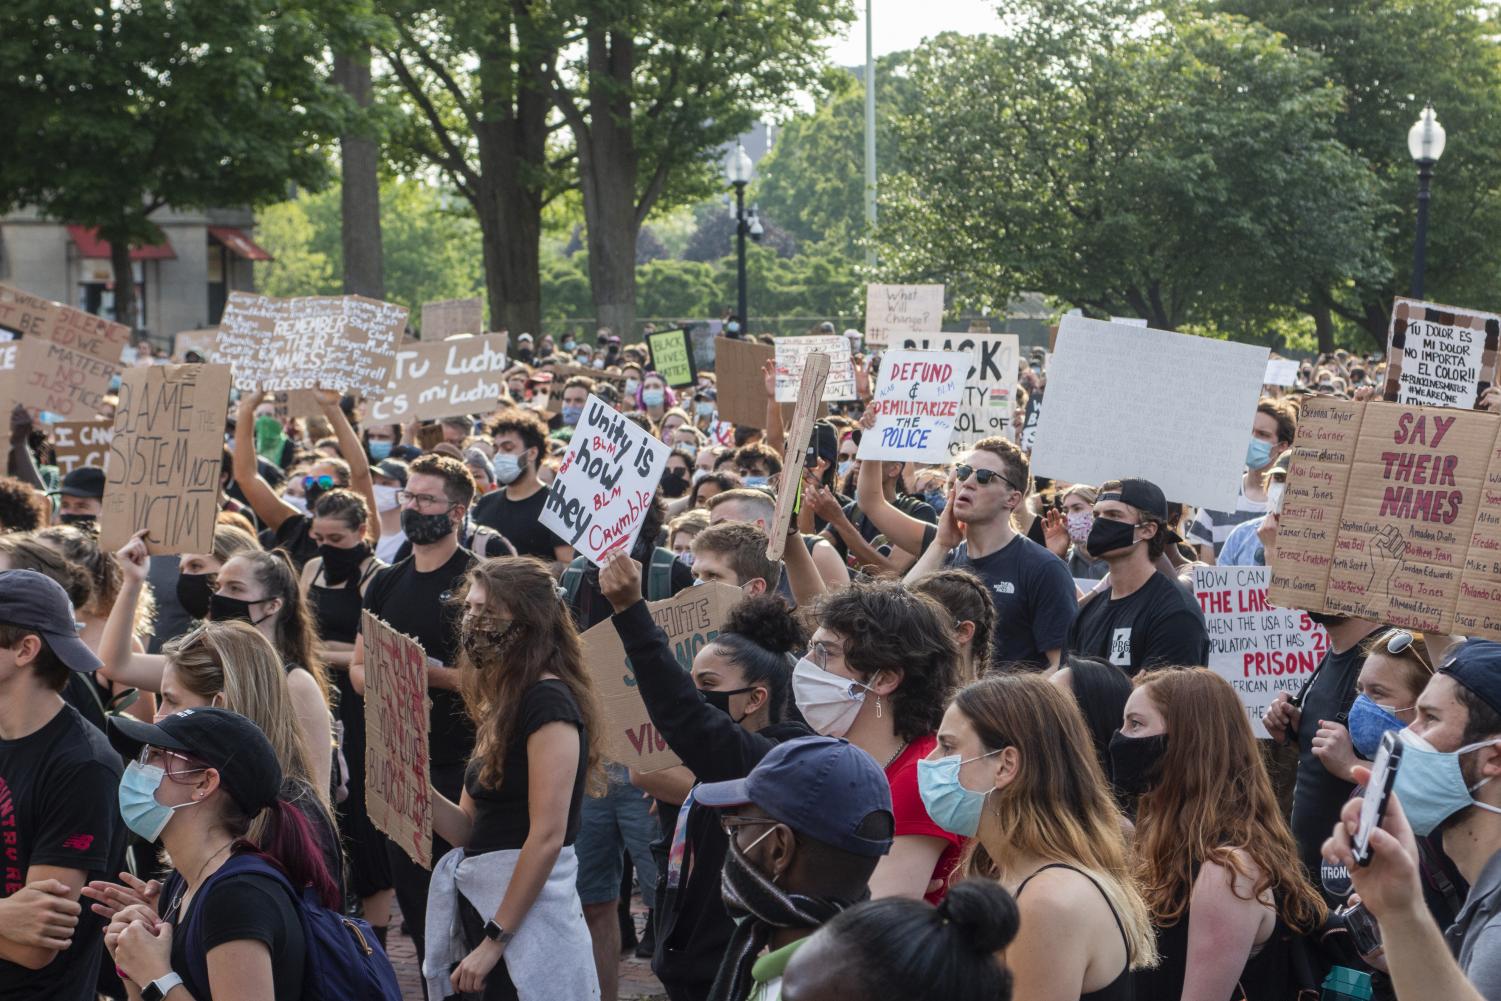 Heres+a+timeline+showing+how+protests+stayed+peaceful+in+Boston